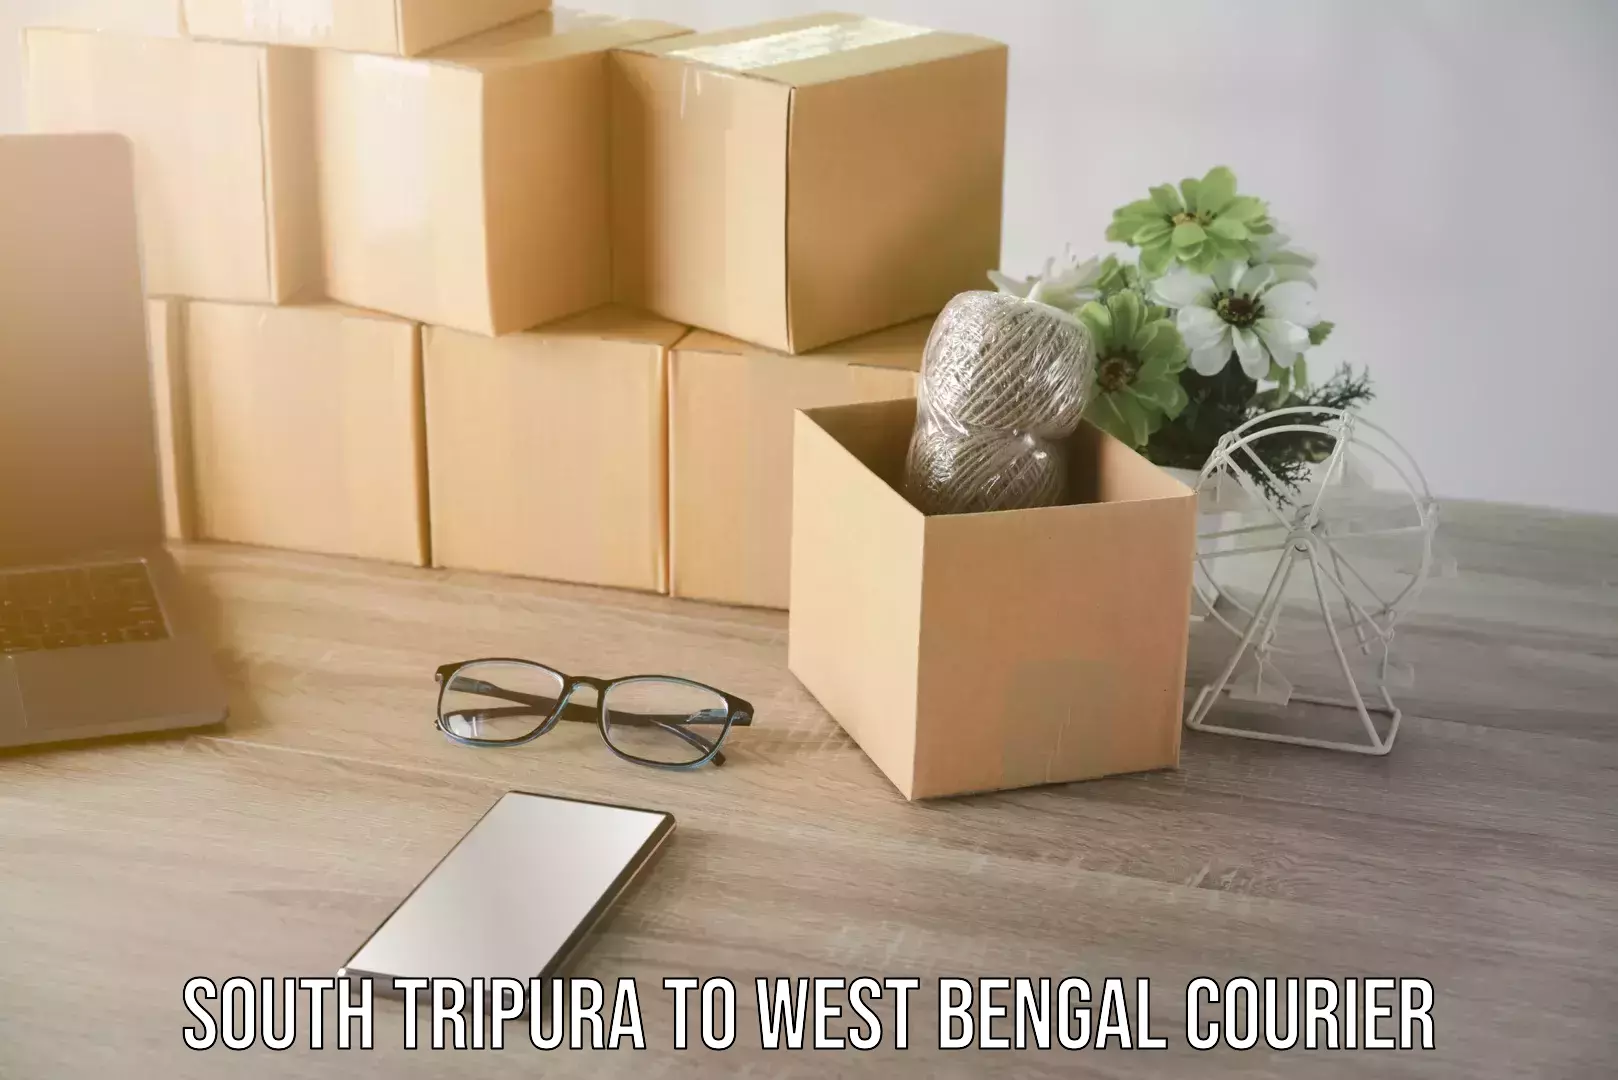 Nationwide delivery network South Tripura to West Bengal